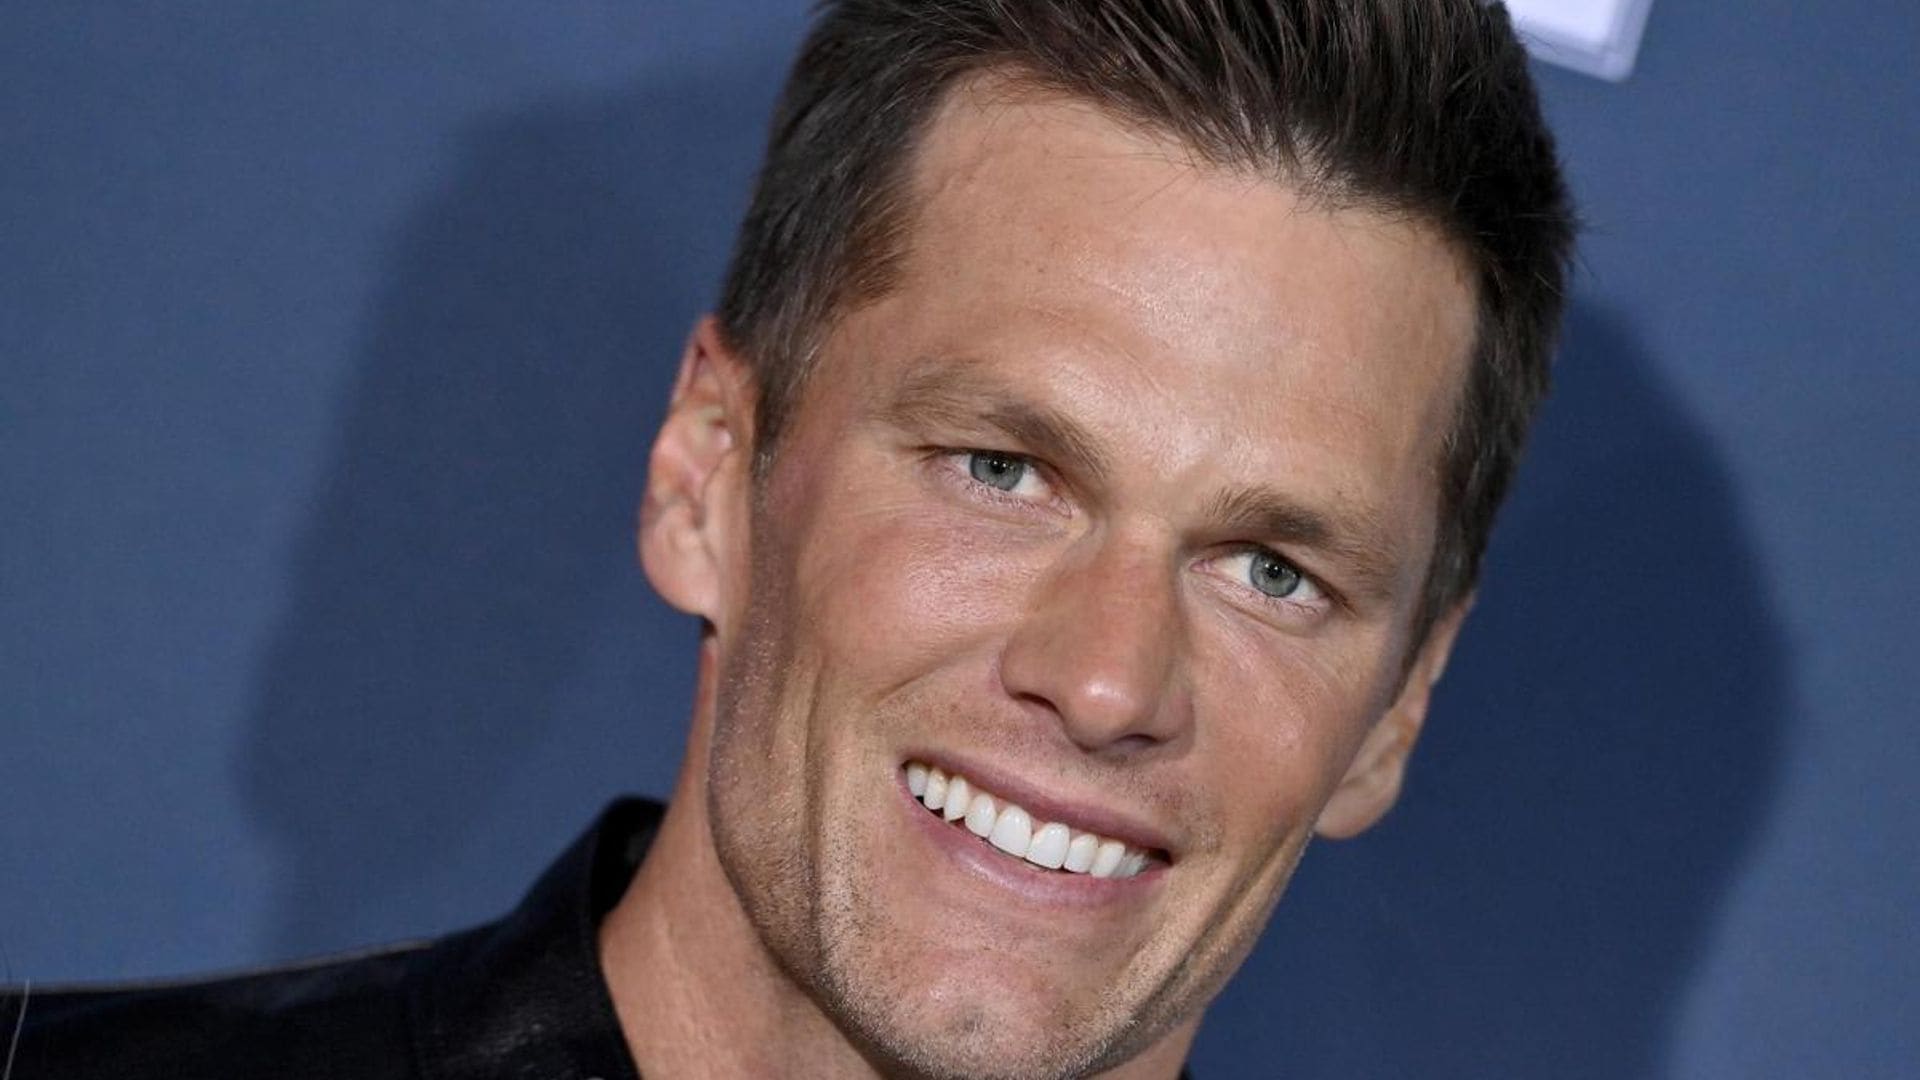 Tom Brady shared the secrets behind his diet post-NFL career